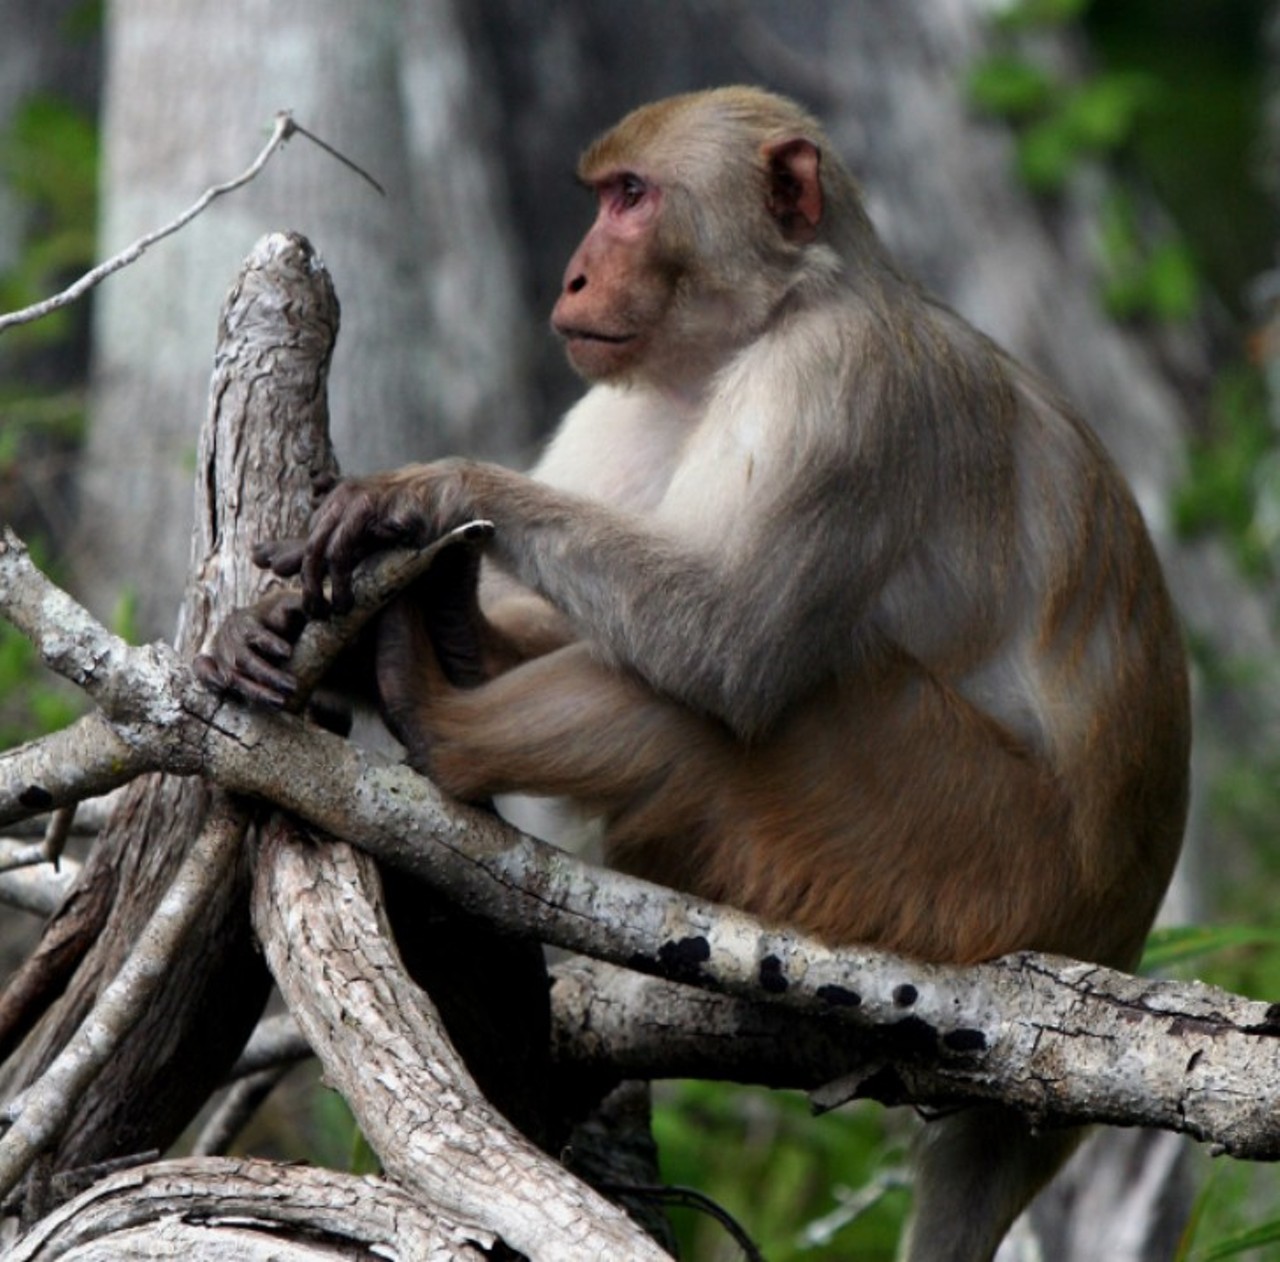 Paddle your way to a colony of rhesus monkeys
(352) 236-7148, 1425 NE 58th Ave, Ocala Silver Springs State Park 
Whether you want to camp, mountain bike, or just simply to gaze at some of the reasons that set Florida apart, including the oddly located rhesus monkeys, the gem that is Silver Springs State Park has you beyond covered.
Photo via Anoldent/Flickr